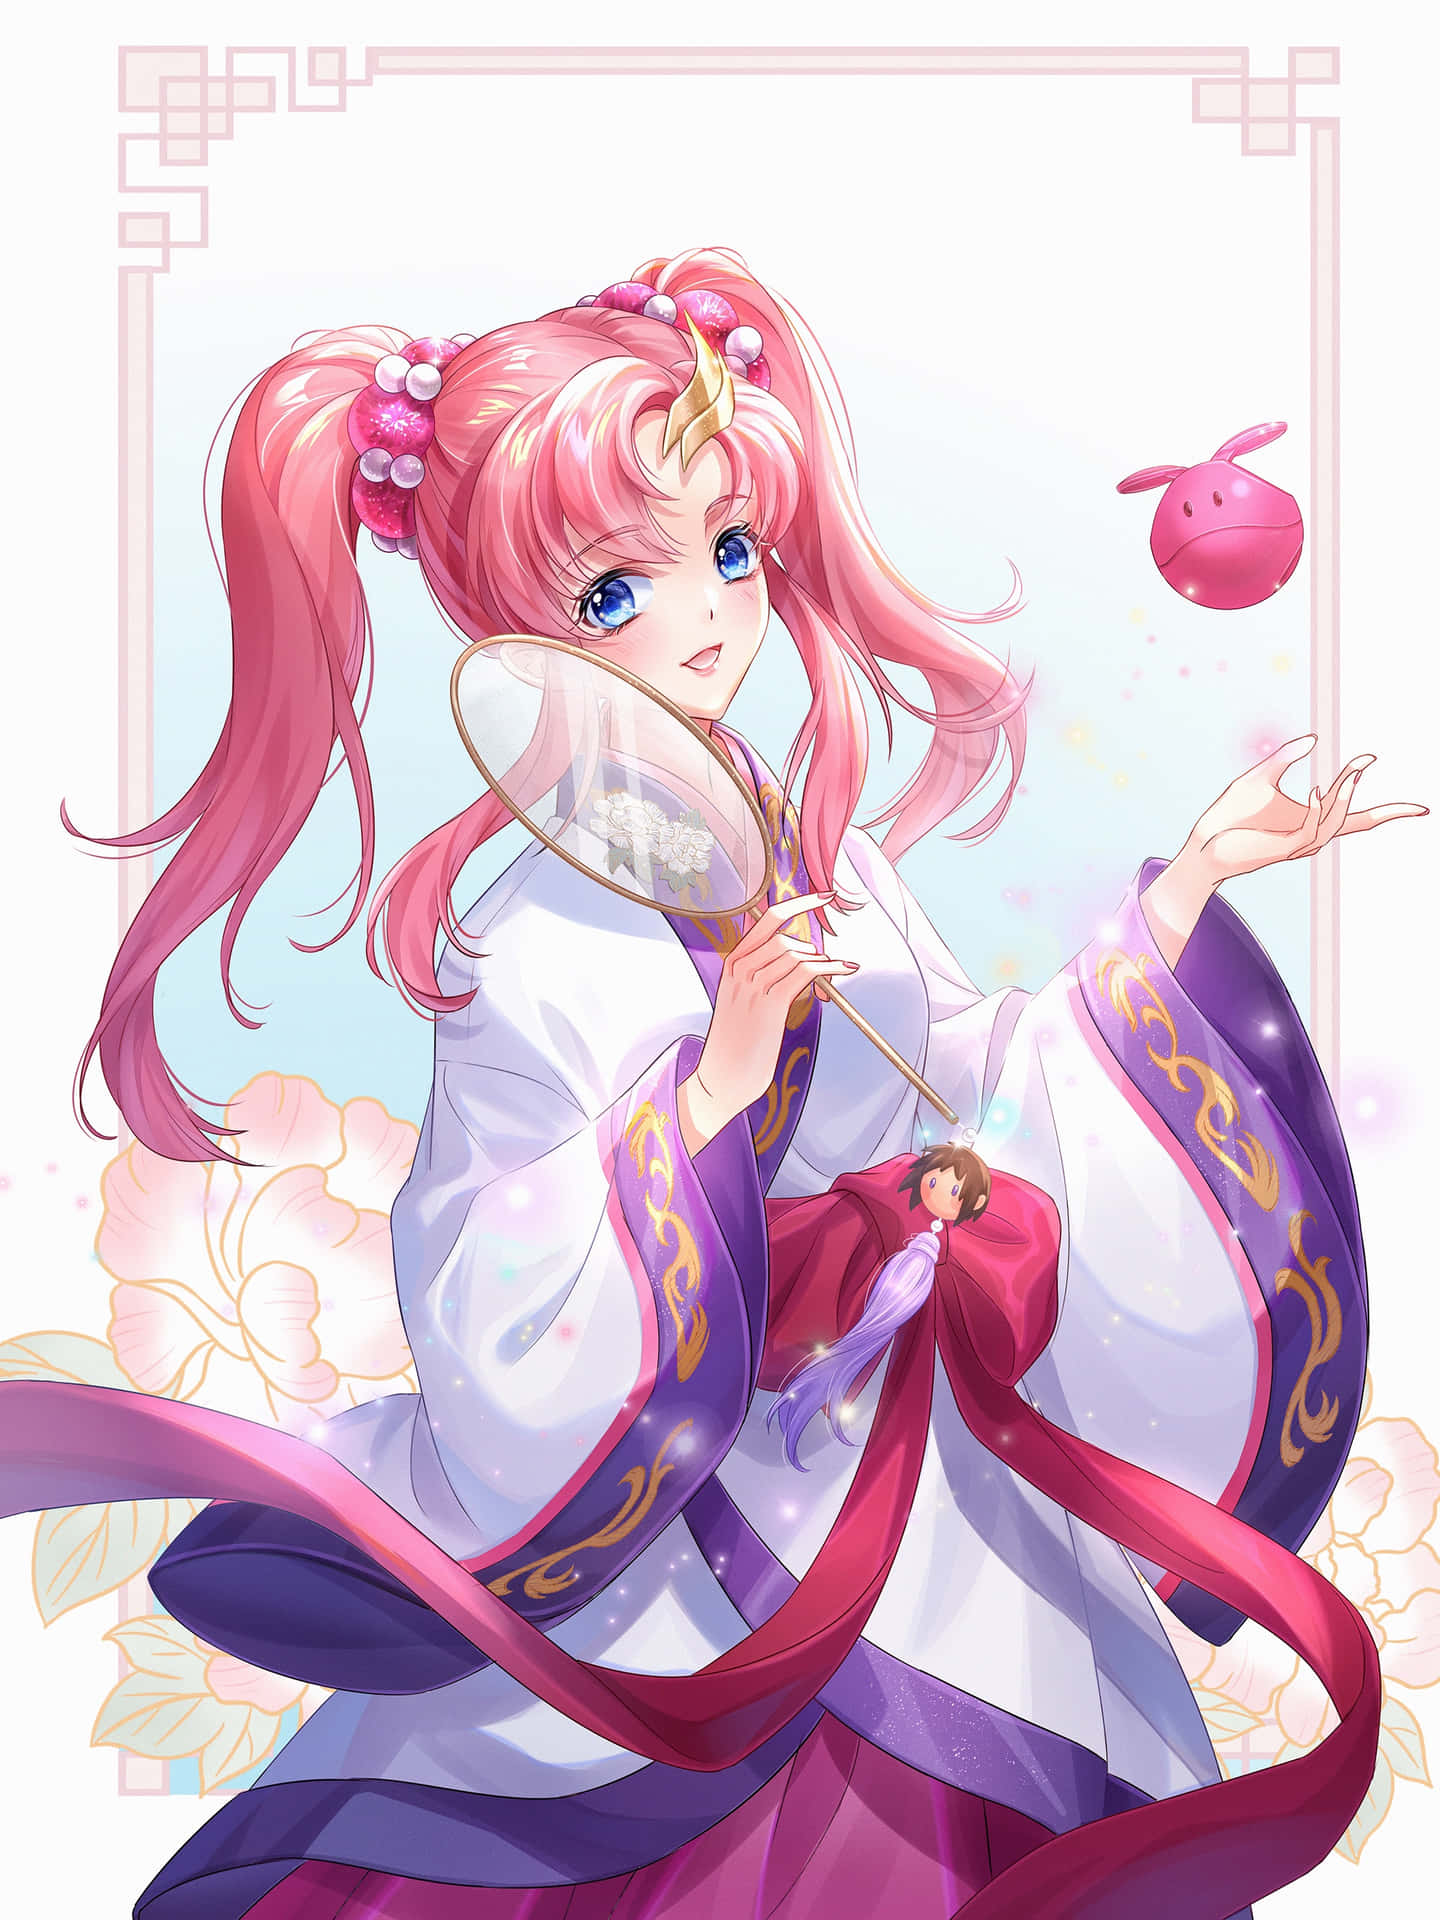 "lacus Clyne – The Melodic Voice Of The Cosmos" Wallpaper